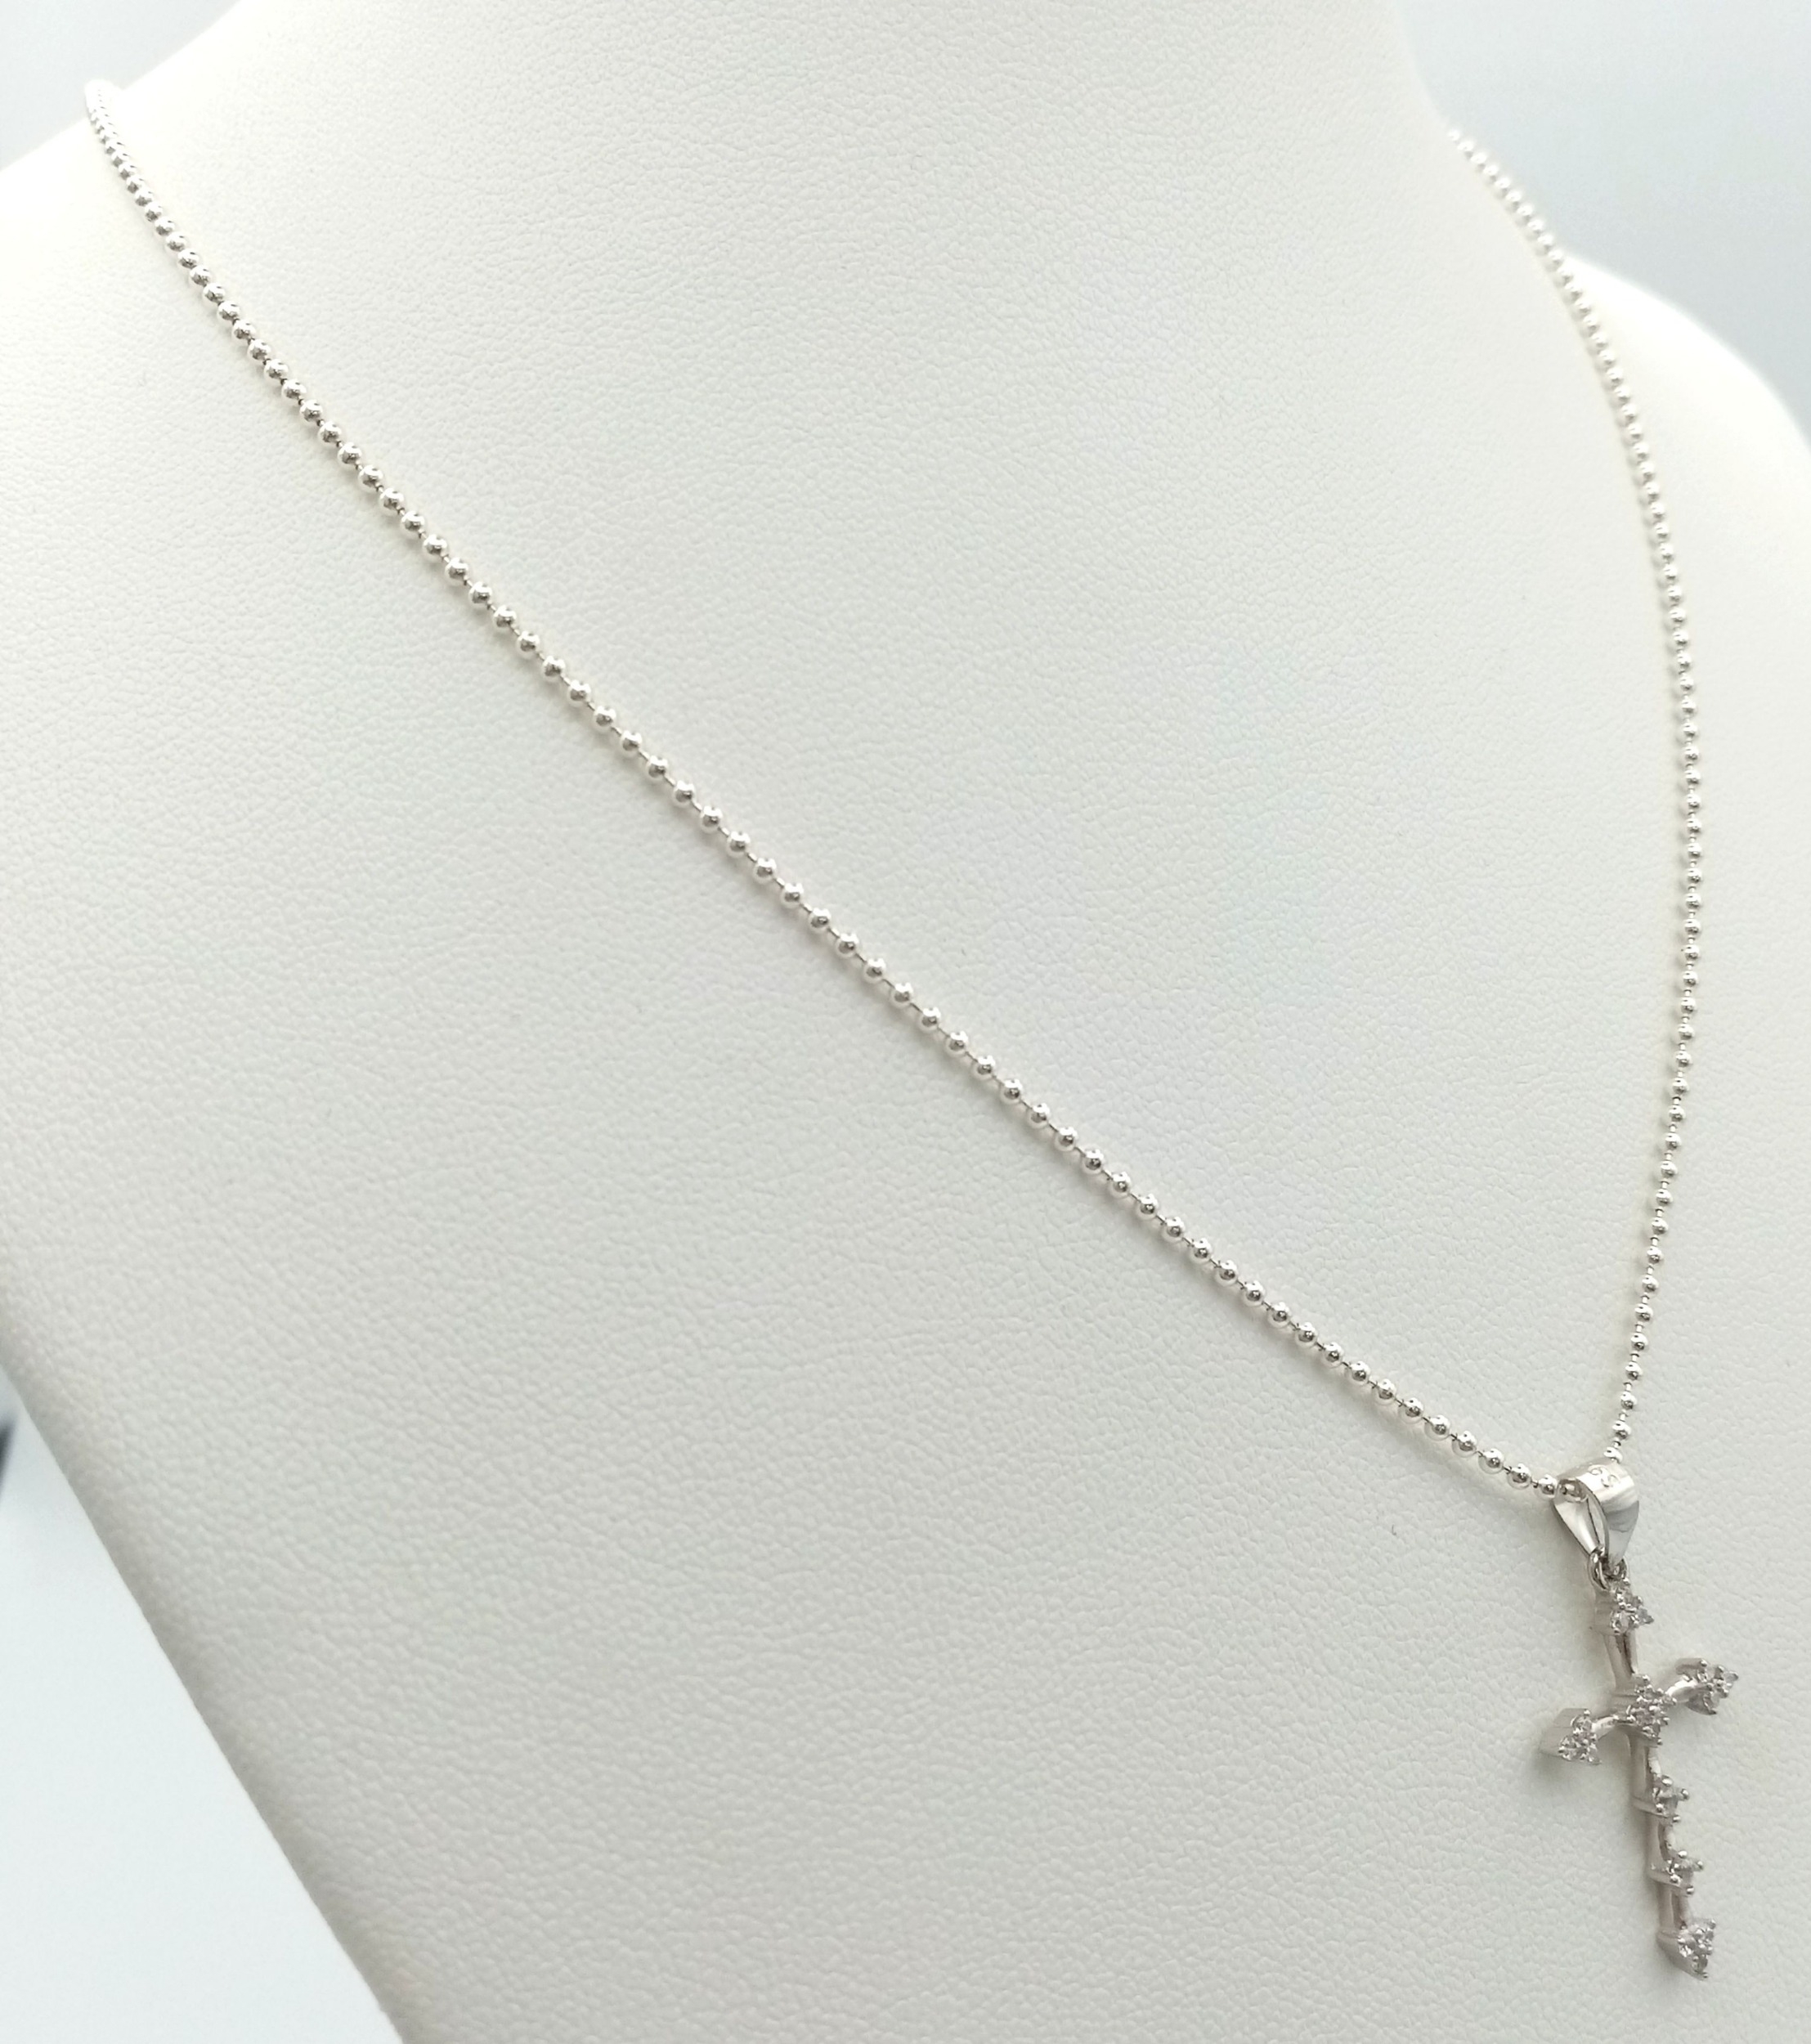 A 925 Silver Cross Pendant on a 925 Silver Chain. 3cm and 40cm. - Image 3 of 5